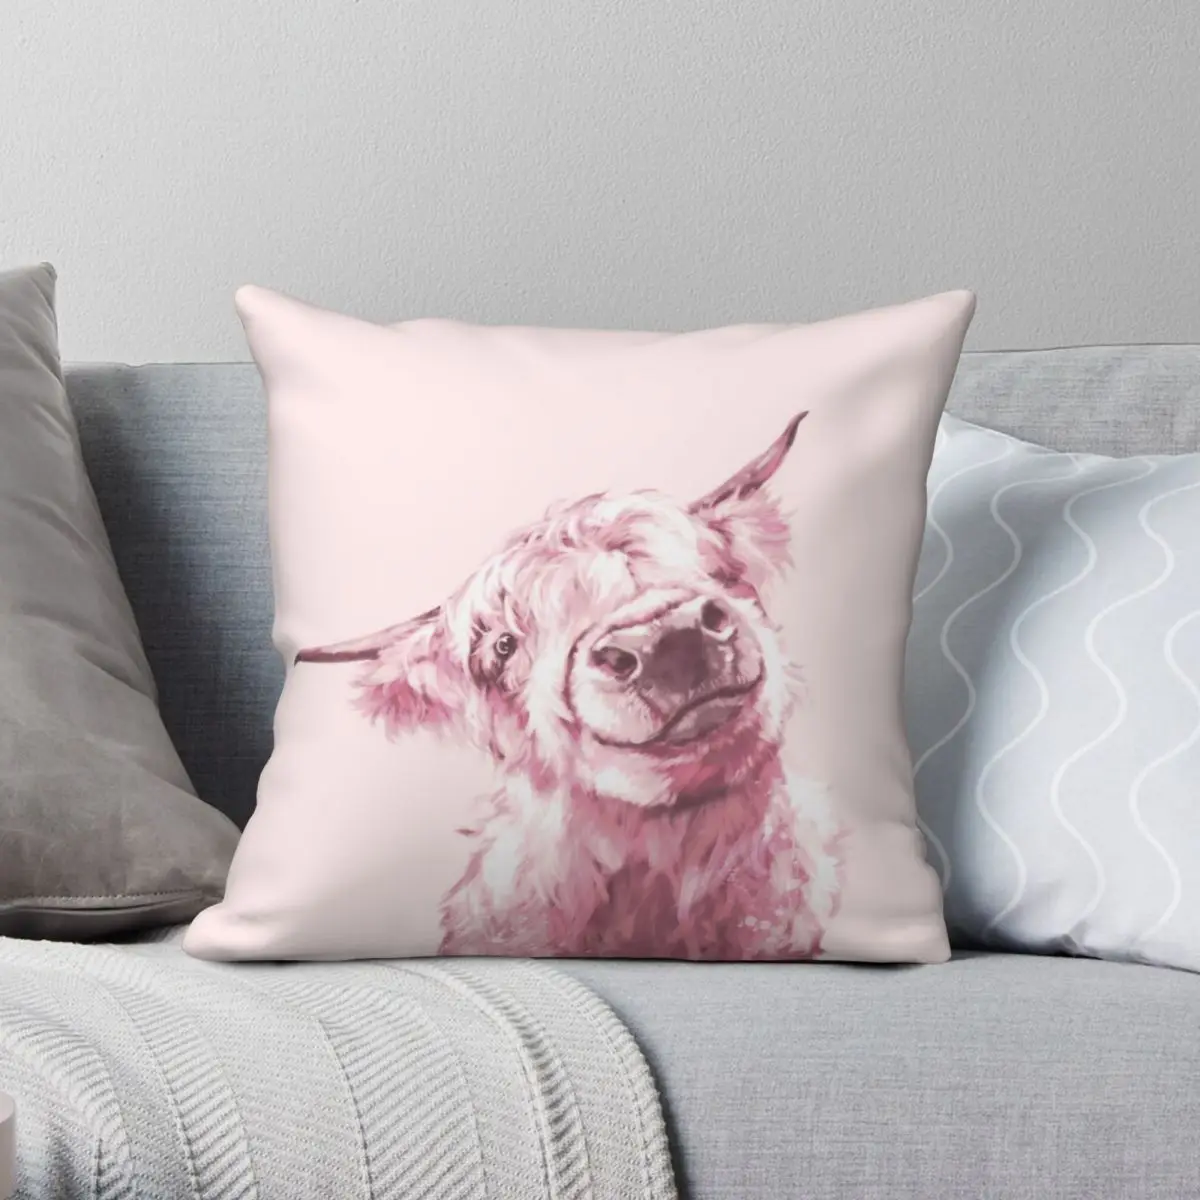 

Highland Cow In Pink Square Pillowcase Polyester Linen Velvet Pattern Zip Decor Car Cushion Cover 45x45